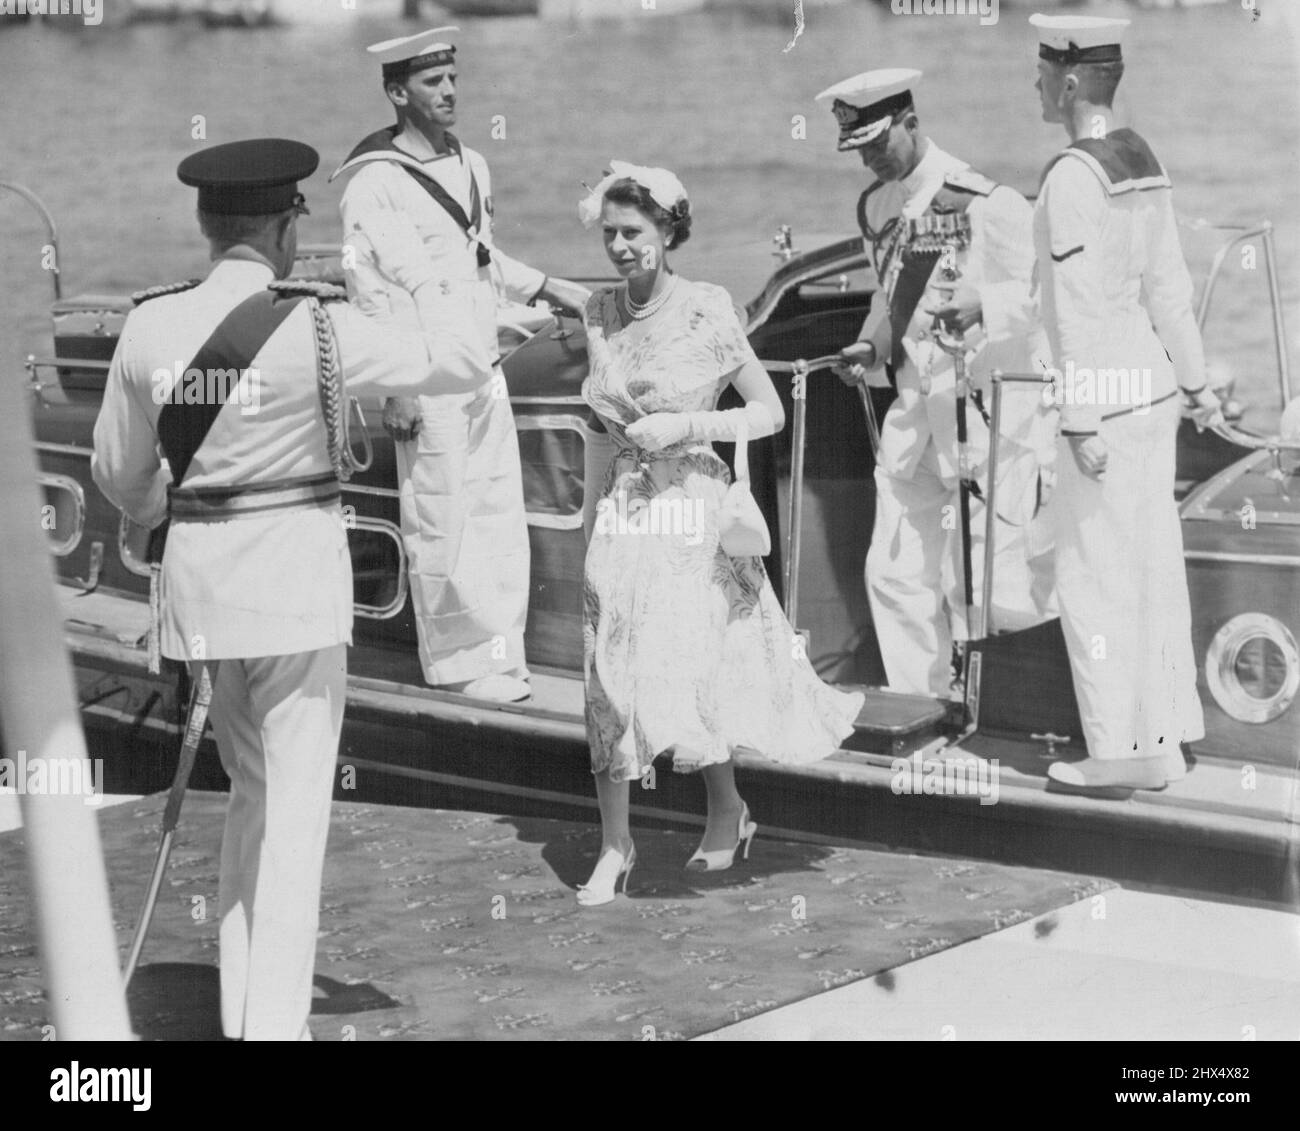 The Queen Steps Ashore -- The historic moment at Farm Cove when Queen Elizabeth II, followed by the Duke, leaves the barge to the salute of the Governor-General, Sir William Slim and the cheers of citizens who had awaited this moment for hours. February 15, 1954. Stock Photo